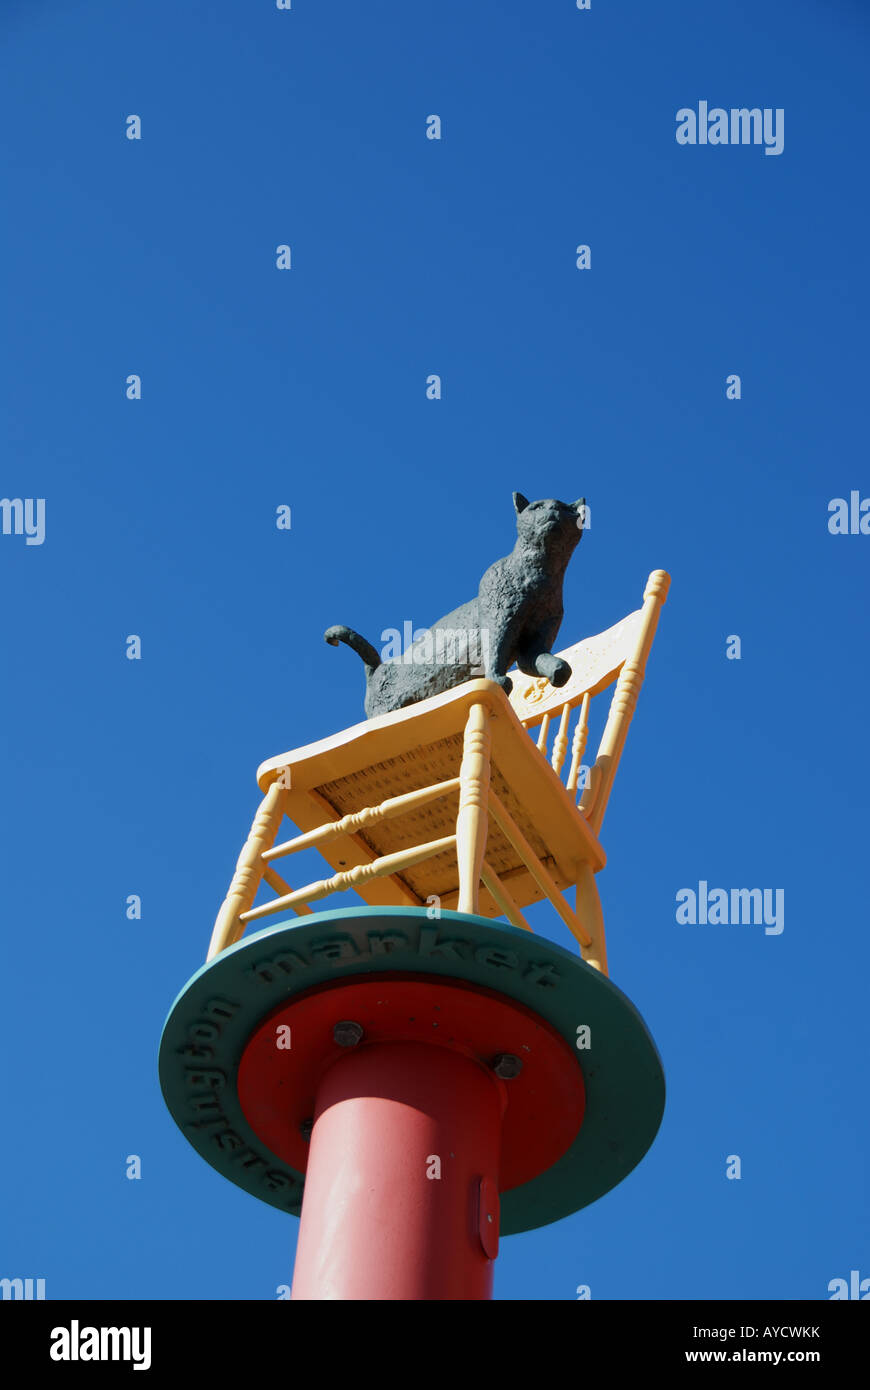 A cat on a chair sculpture in Toronto Canada Stock Photo